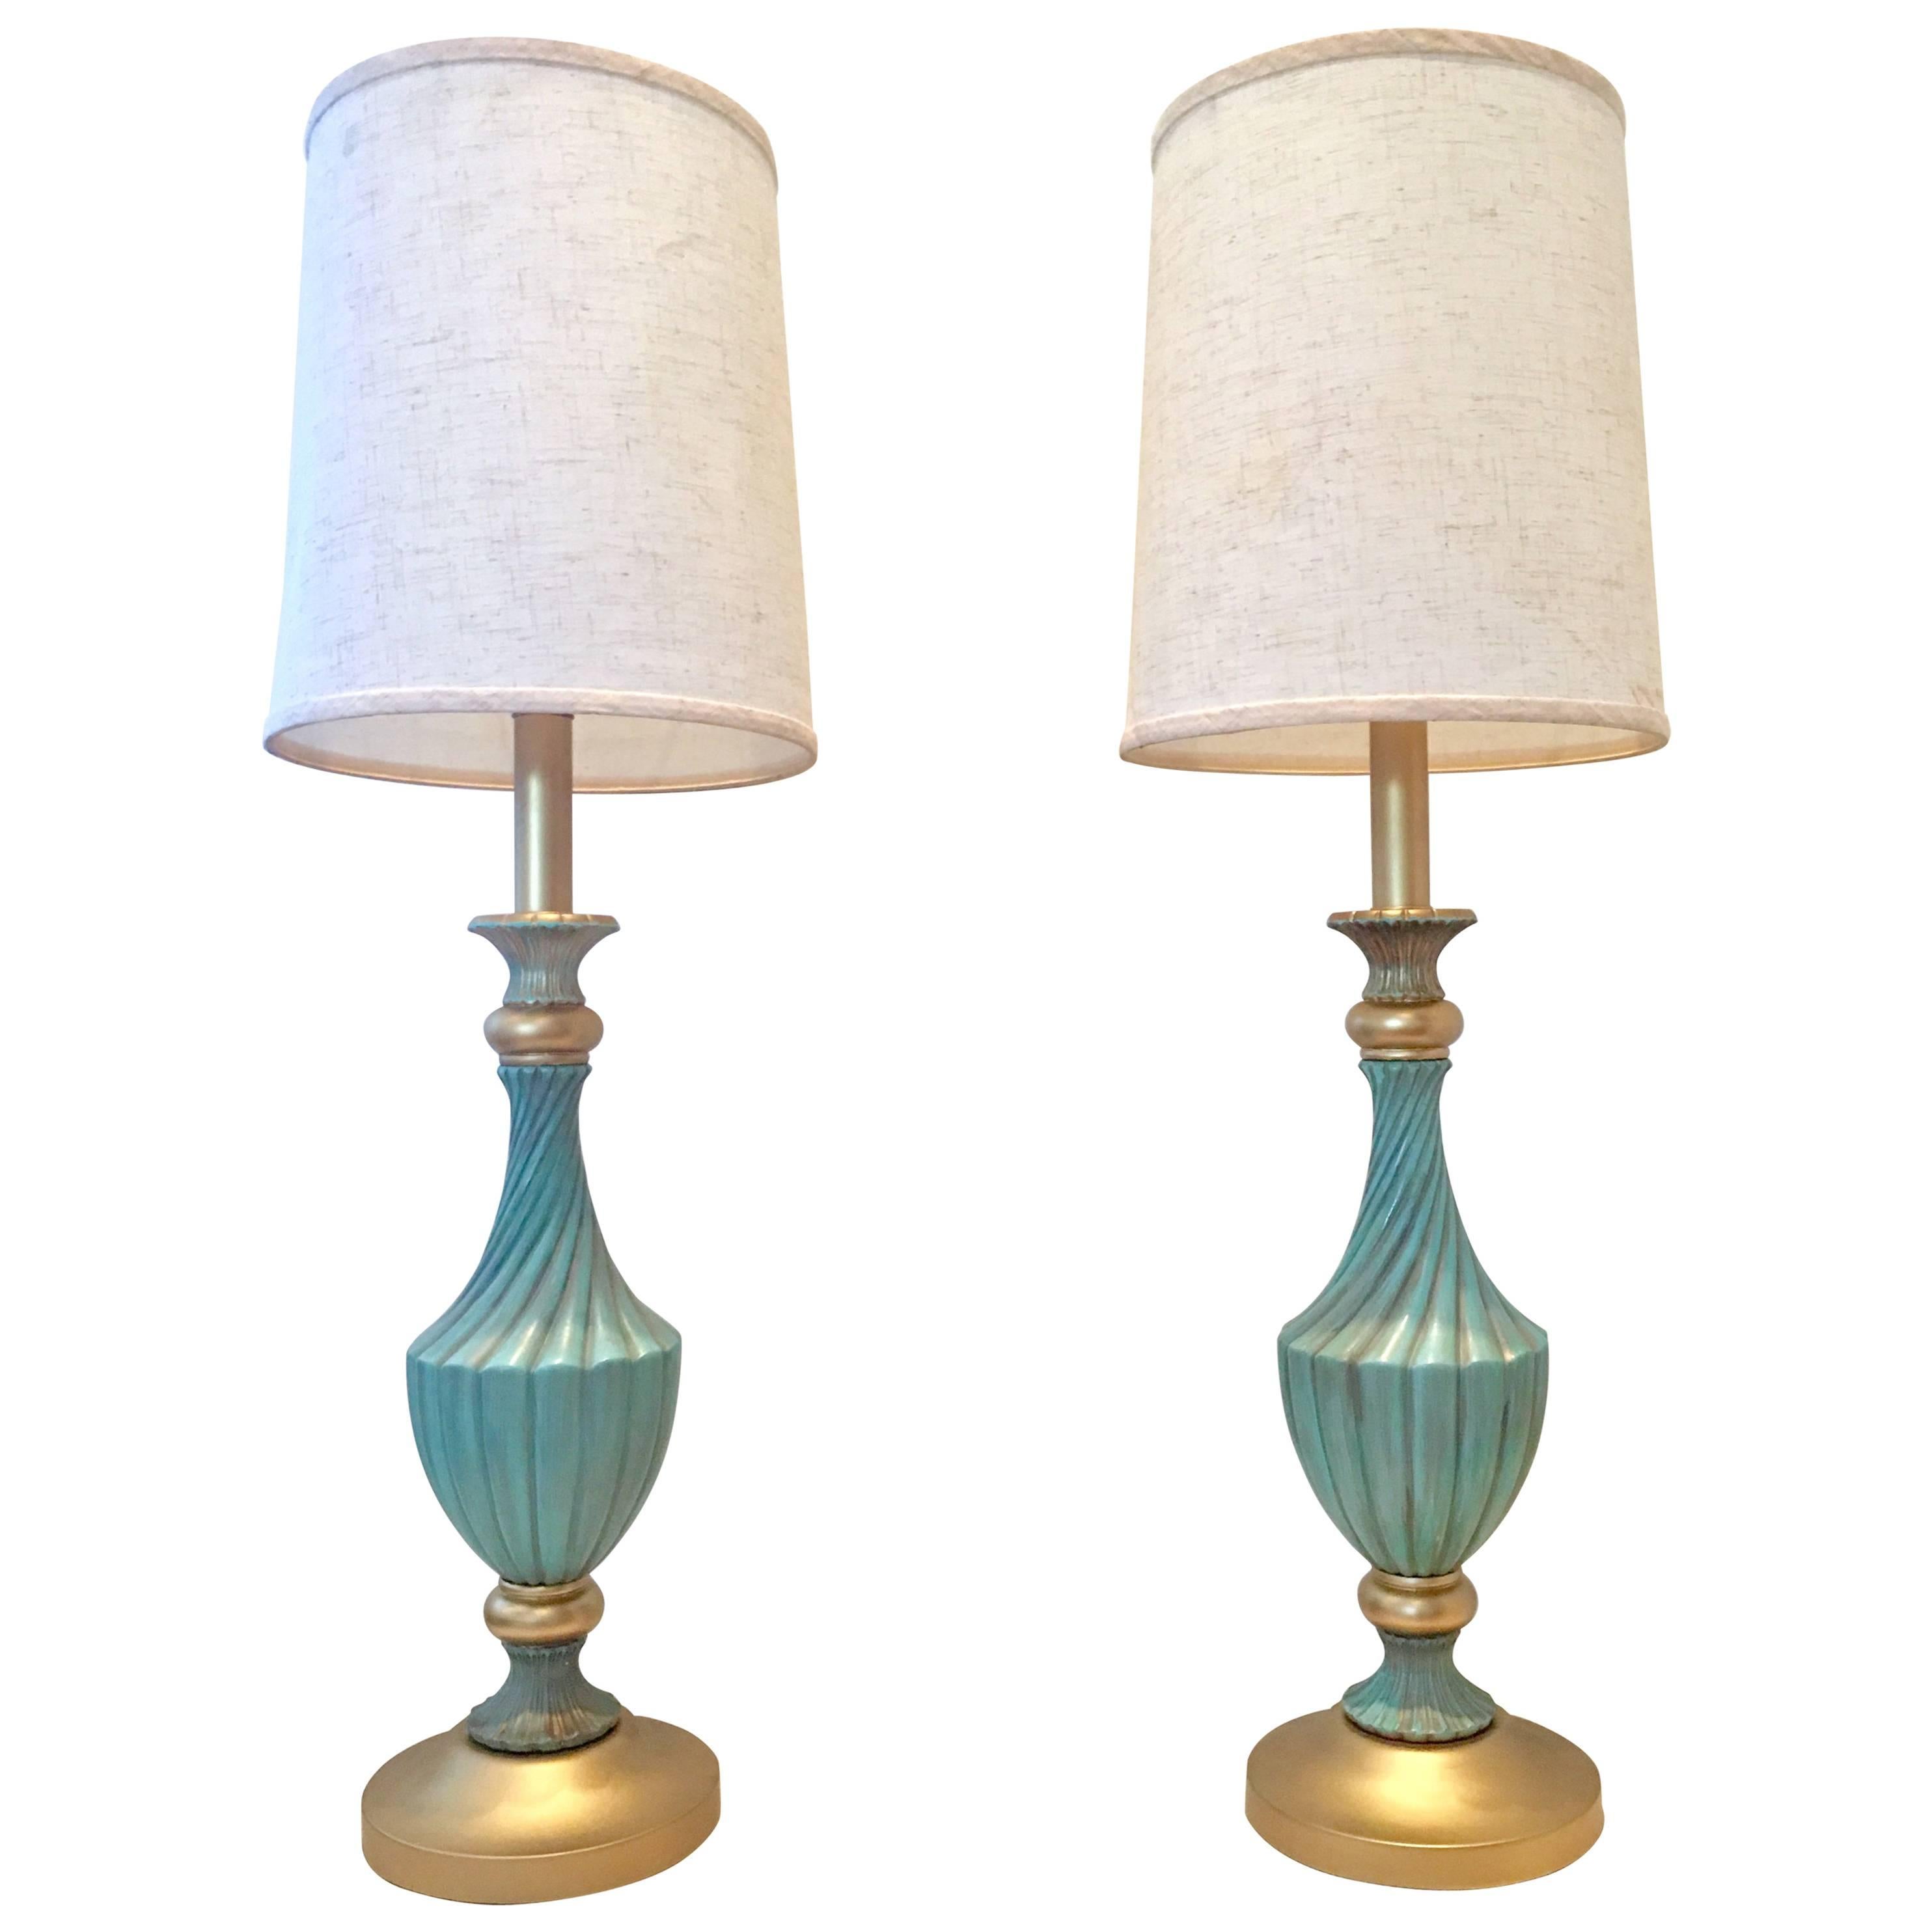 20th Century Pair Of Neoclassical Style Ceramic & Brass Lamps By, Stiffel